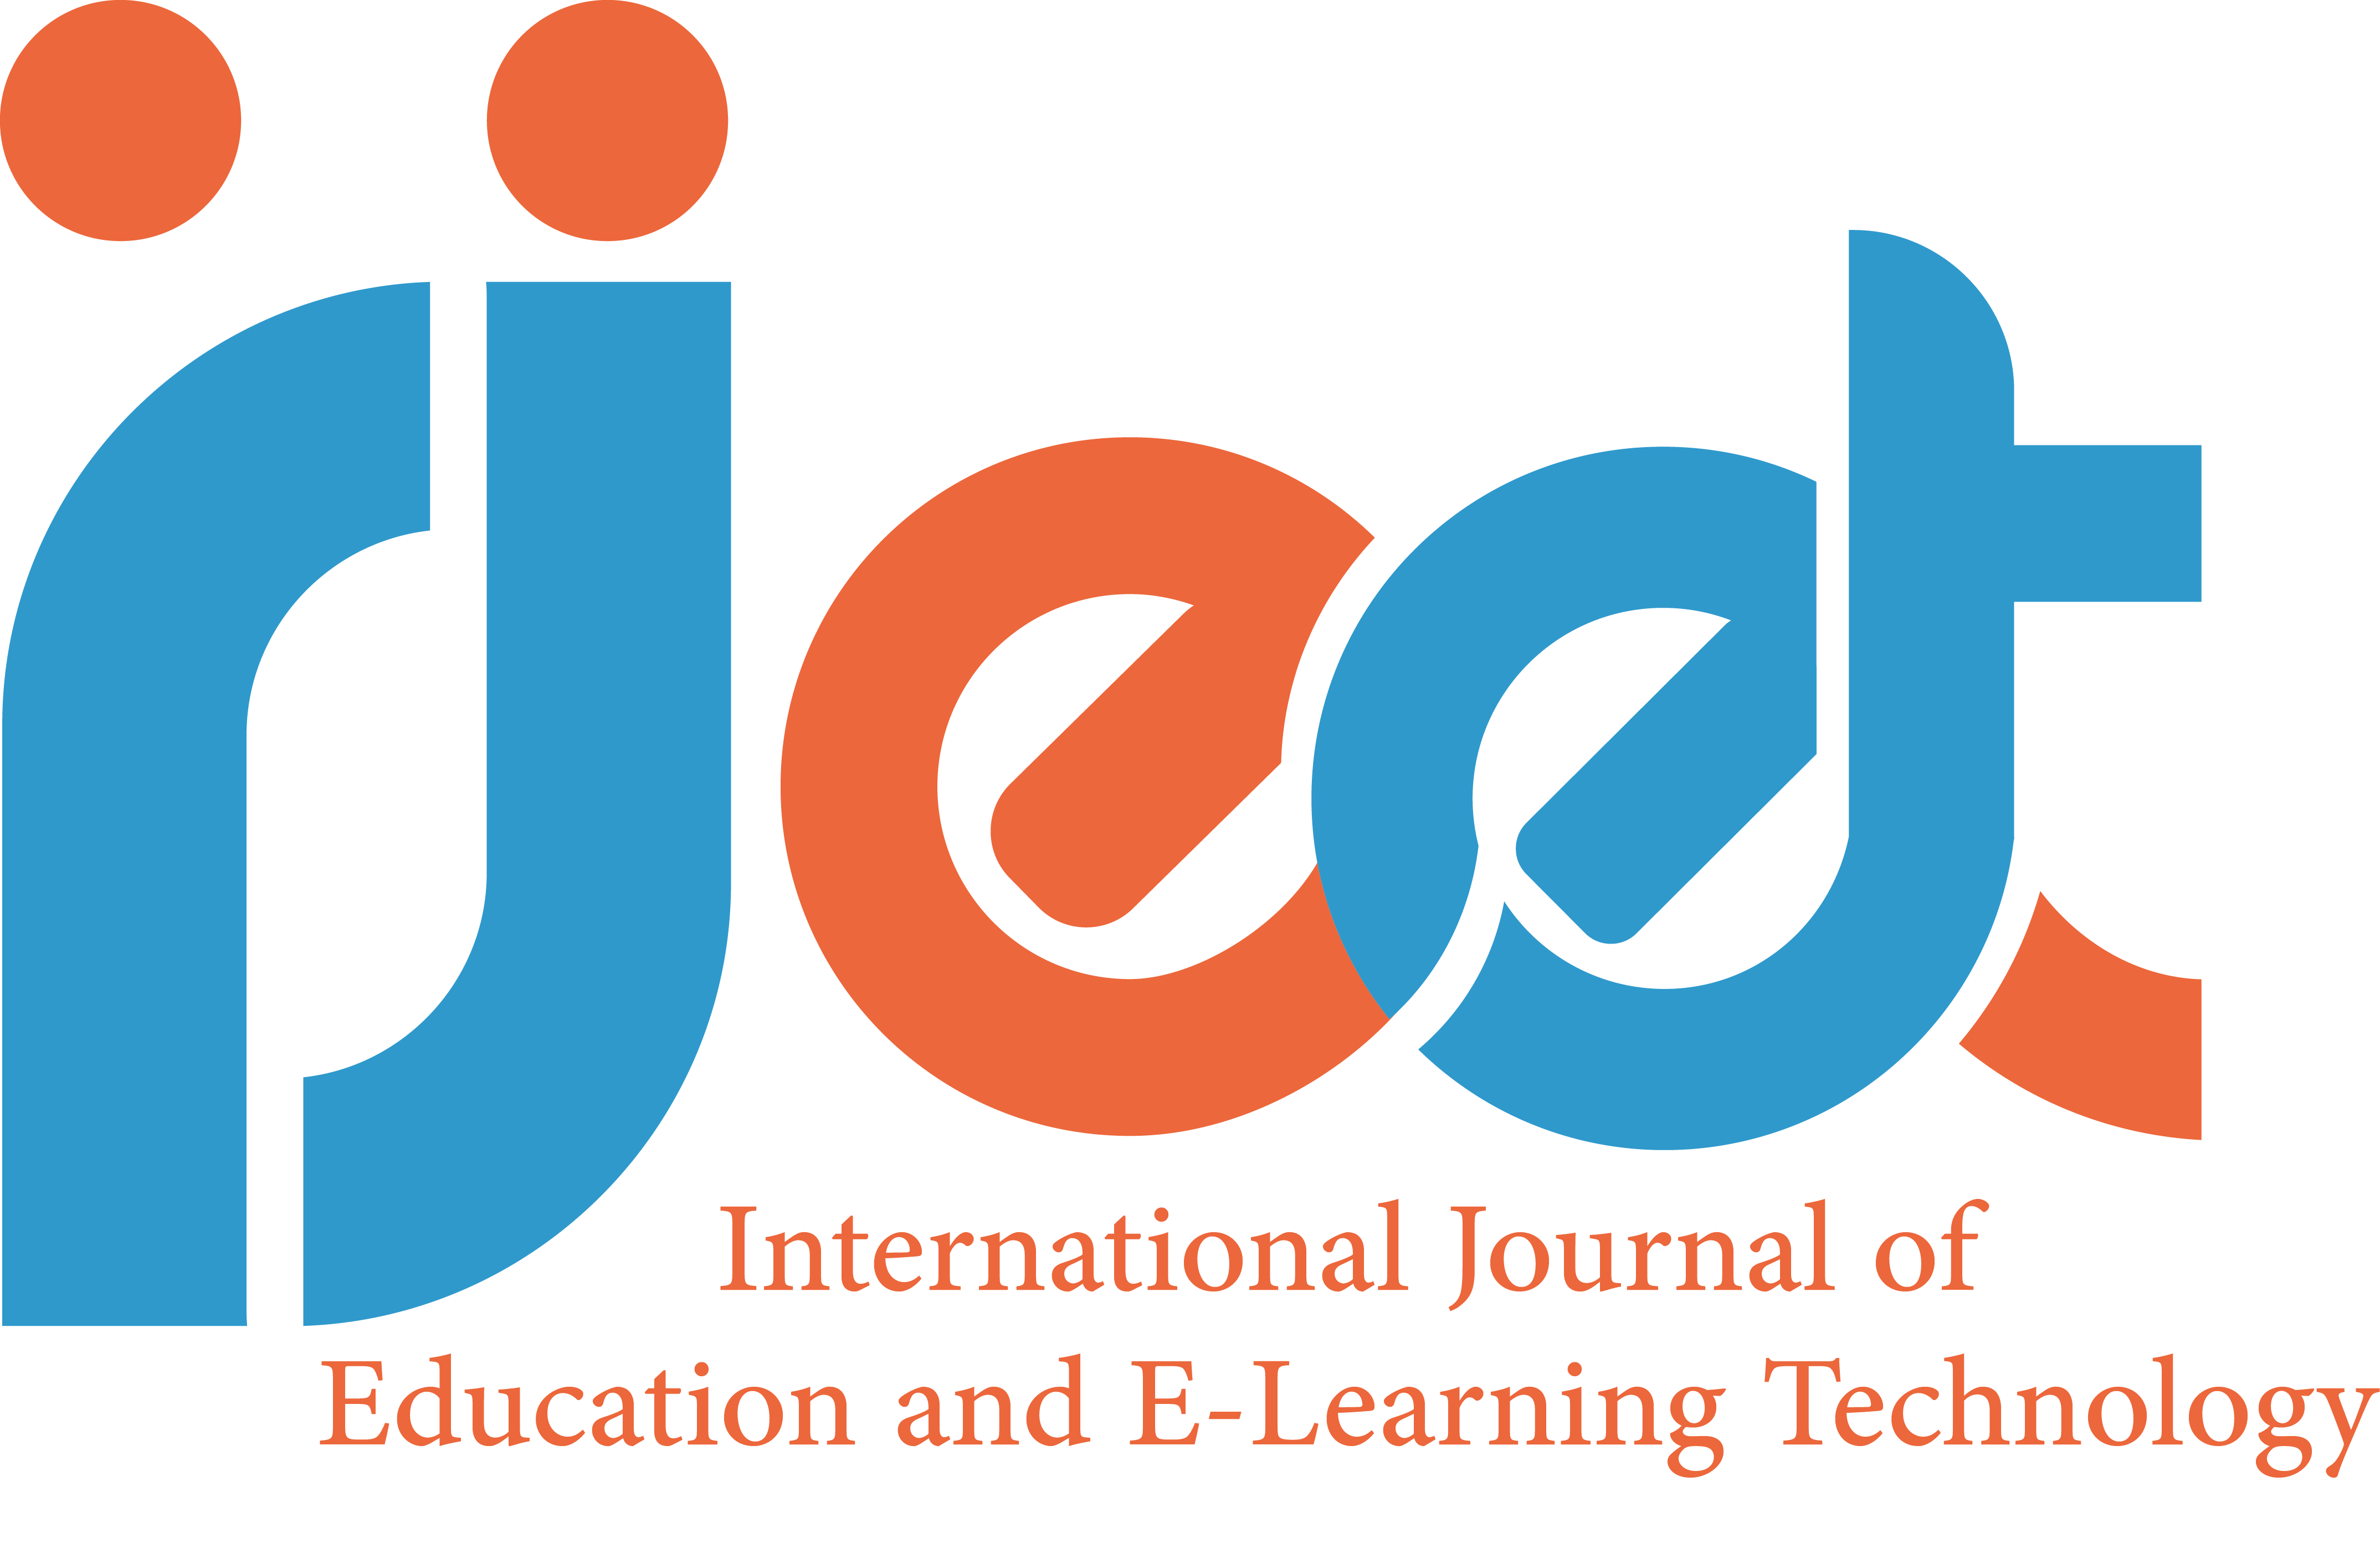 International Journal of Education and E-learning Technology